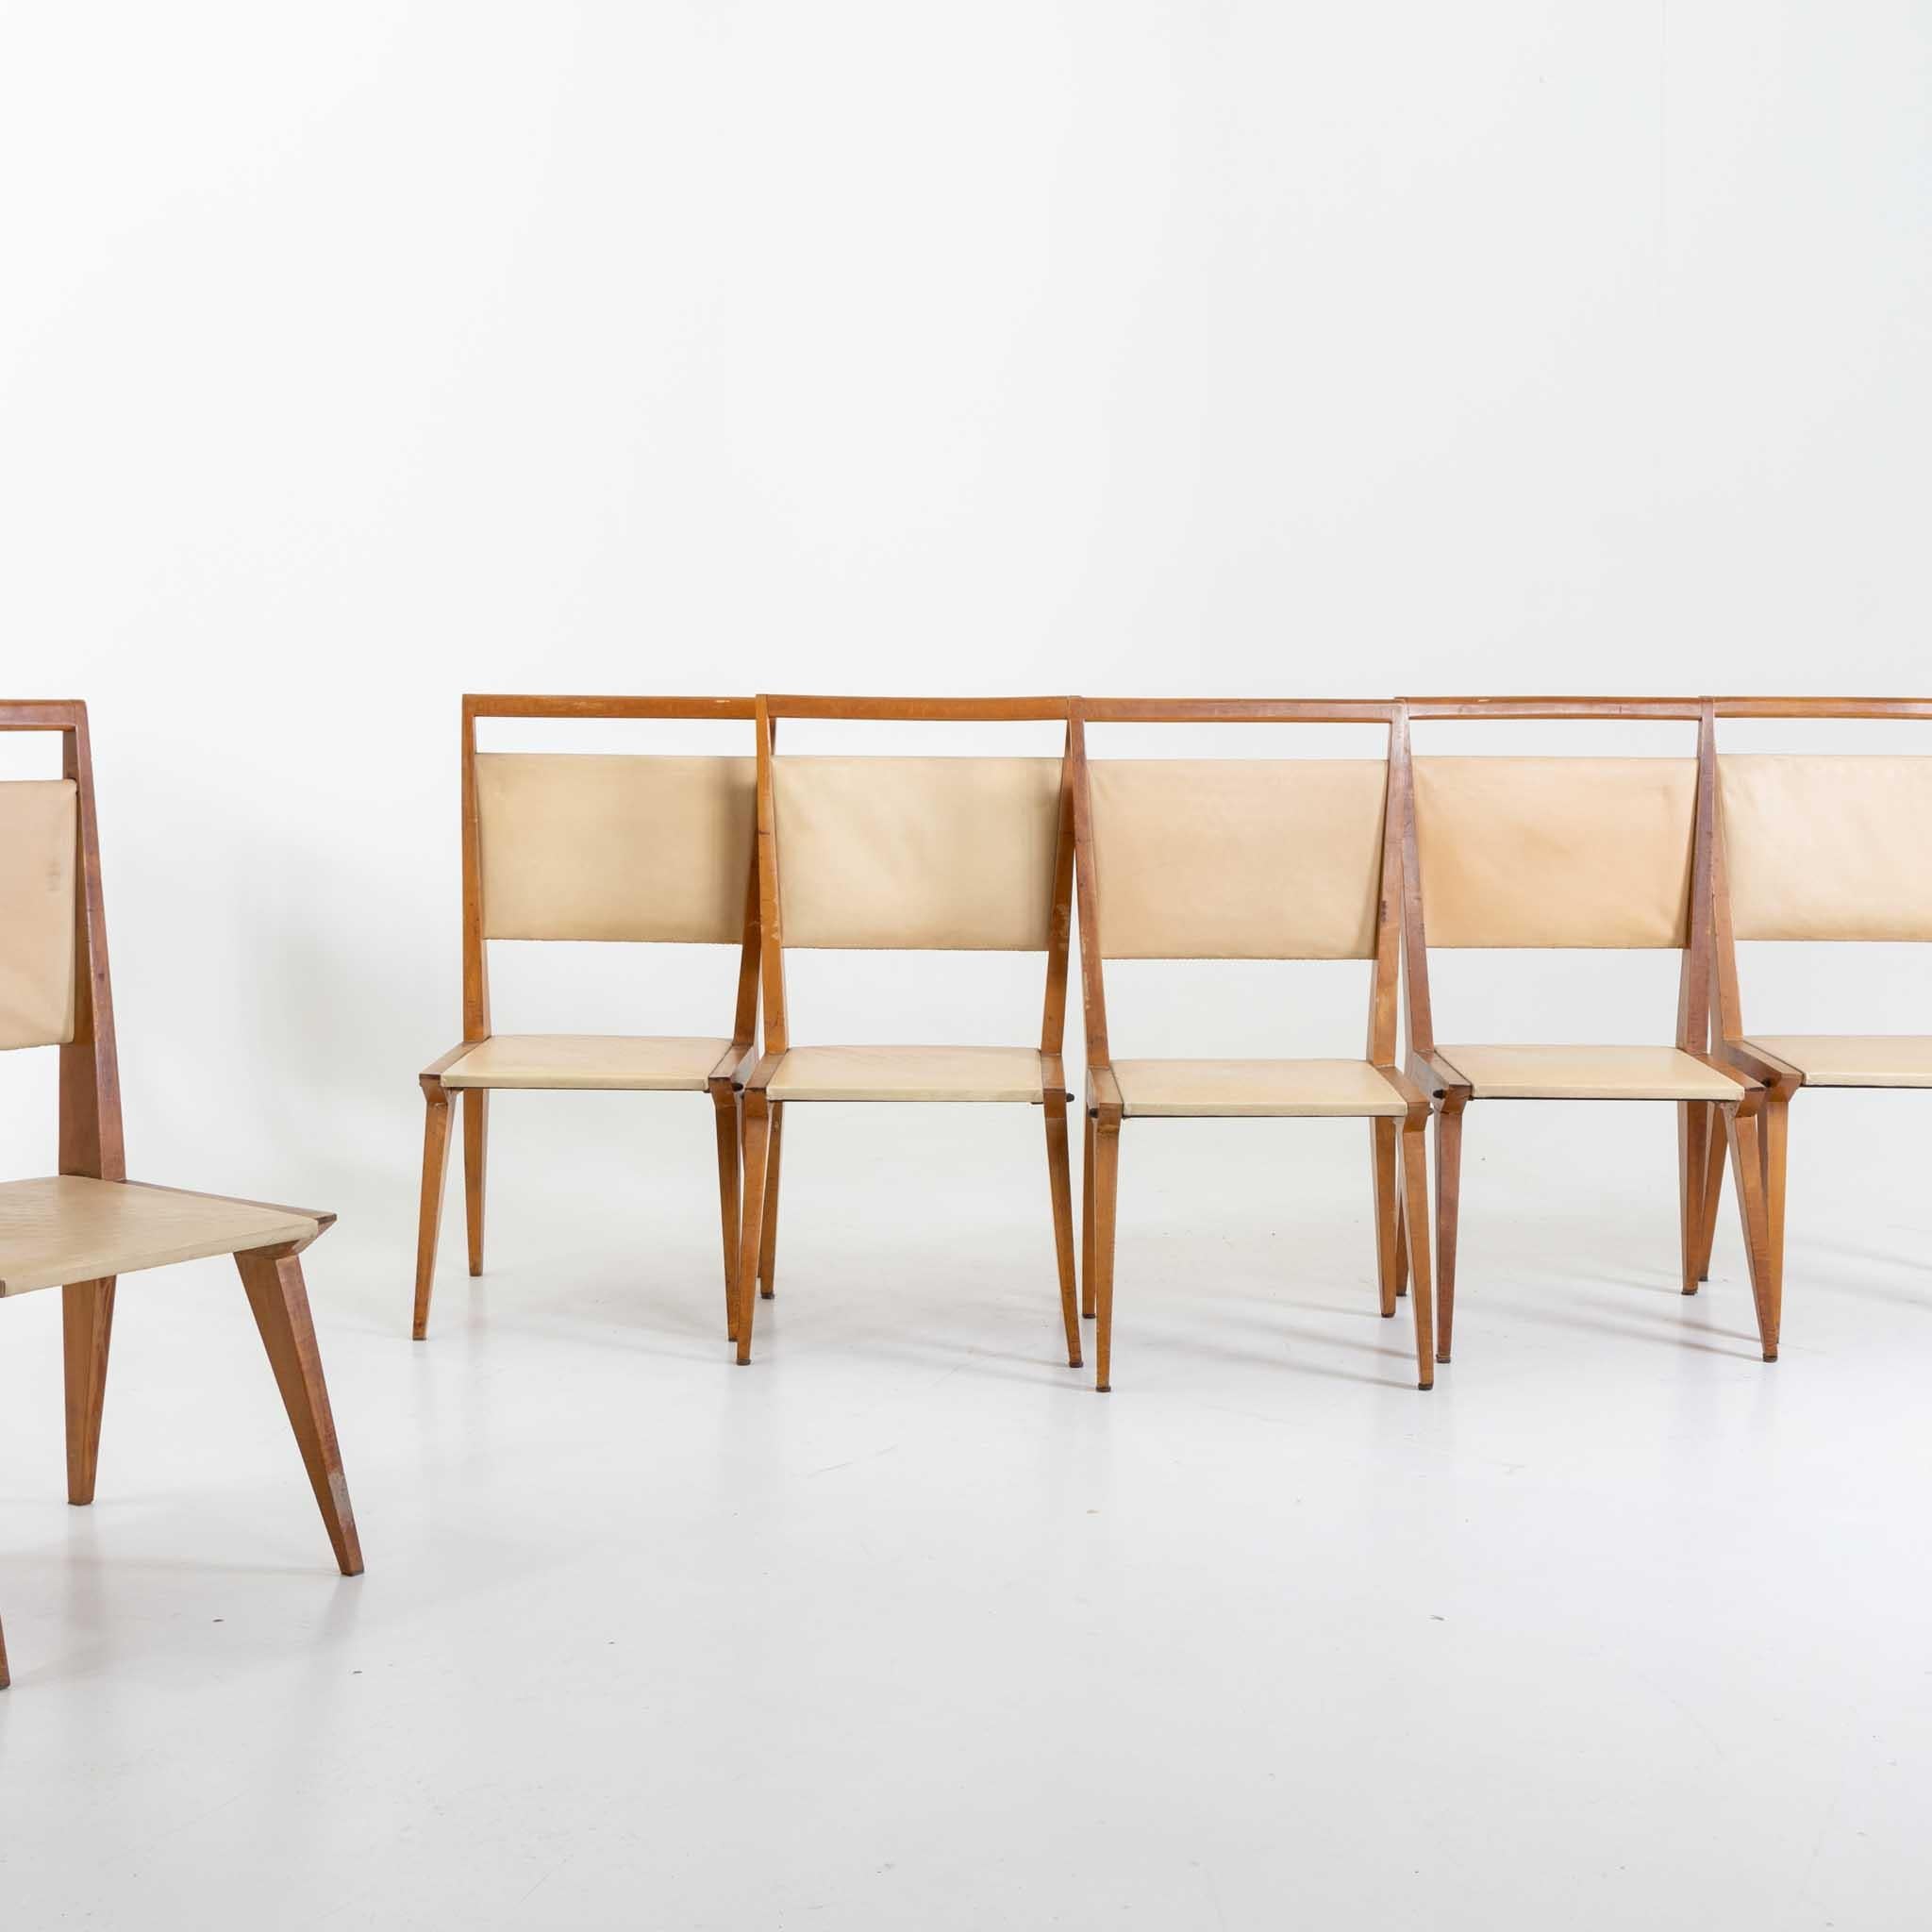 Modern Dining Chairs, Designed by Vittorio Armellini, Italy, Mid-20th Century For Sale